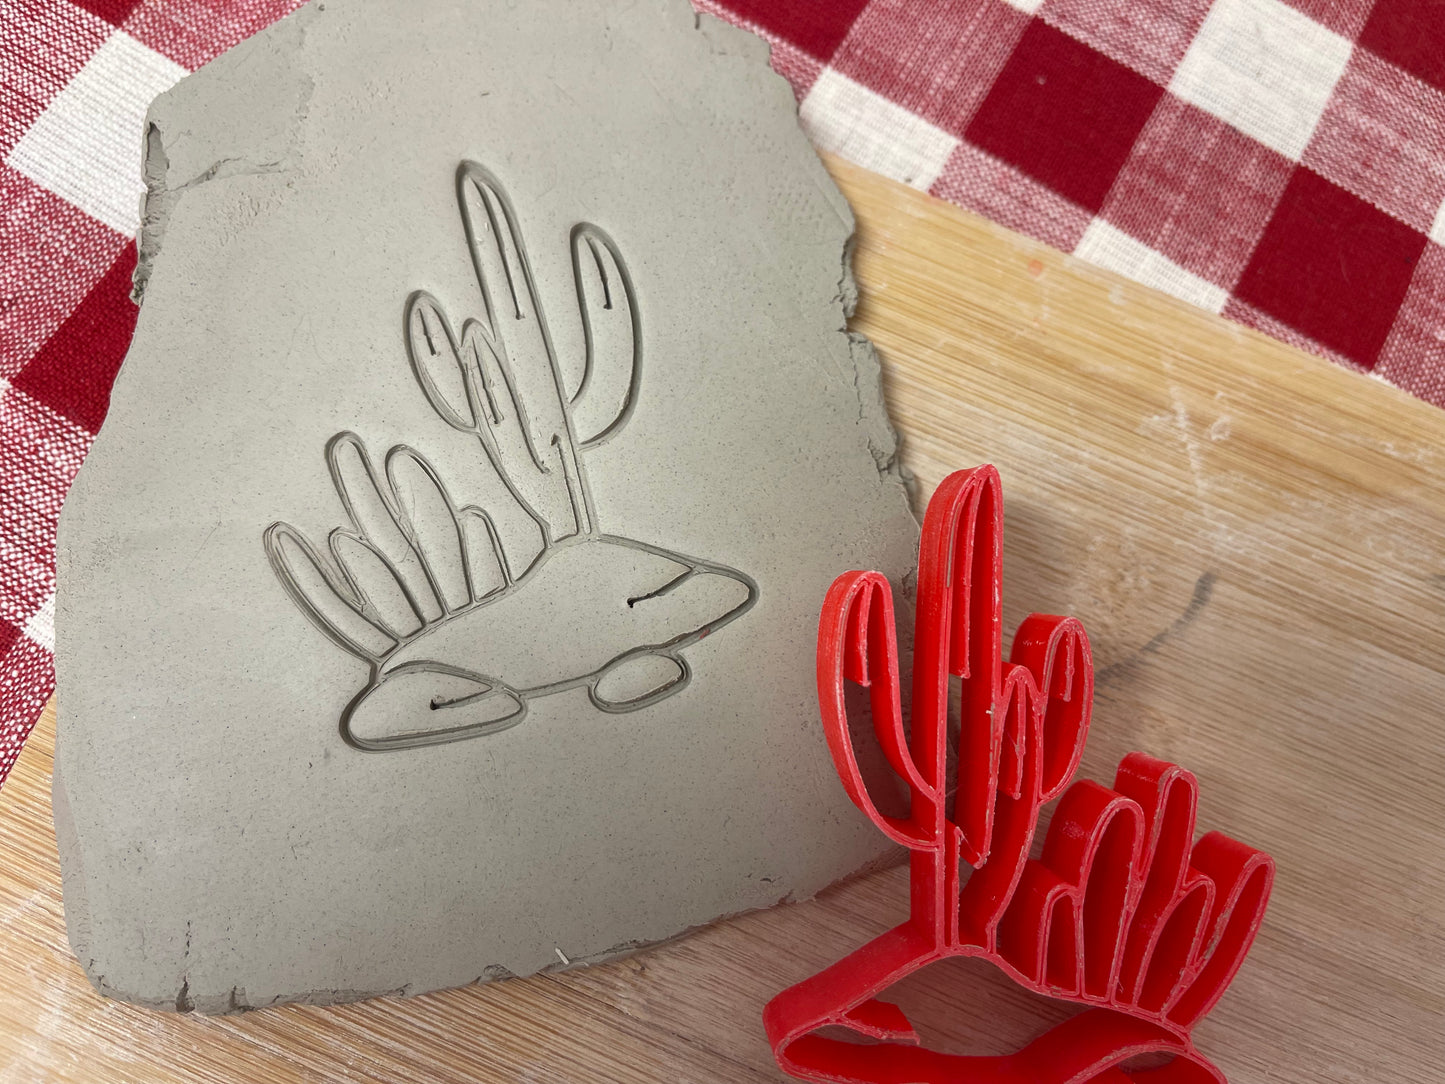 Cactus pottery stamp - from the March 2023 mystery box, multiple sizes available, plastic 3D printed